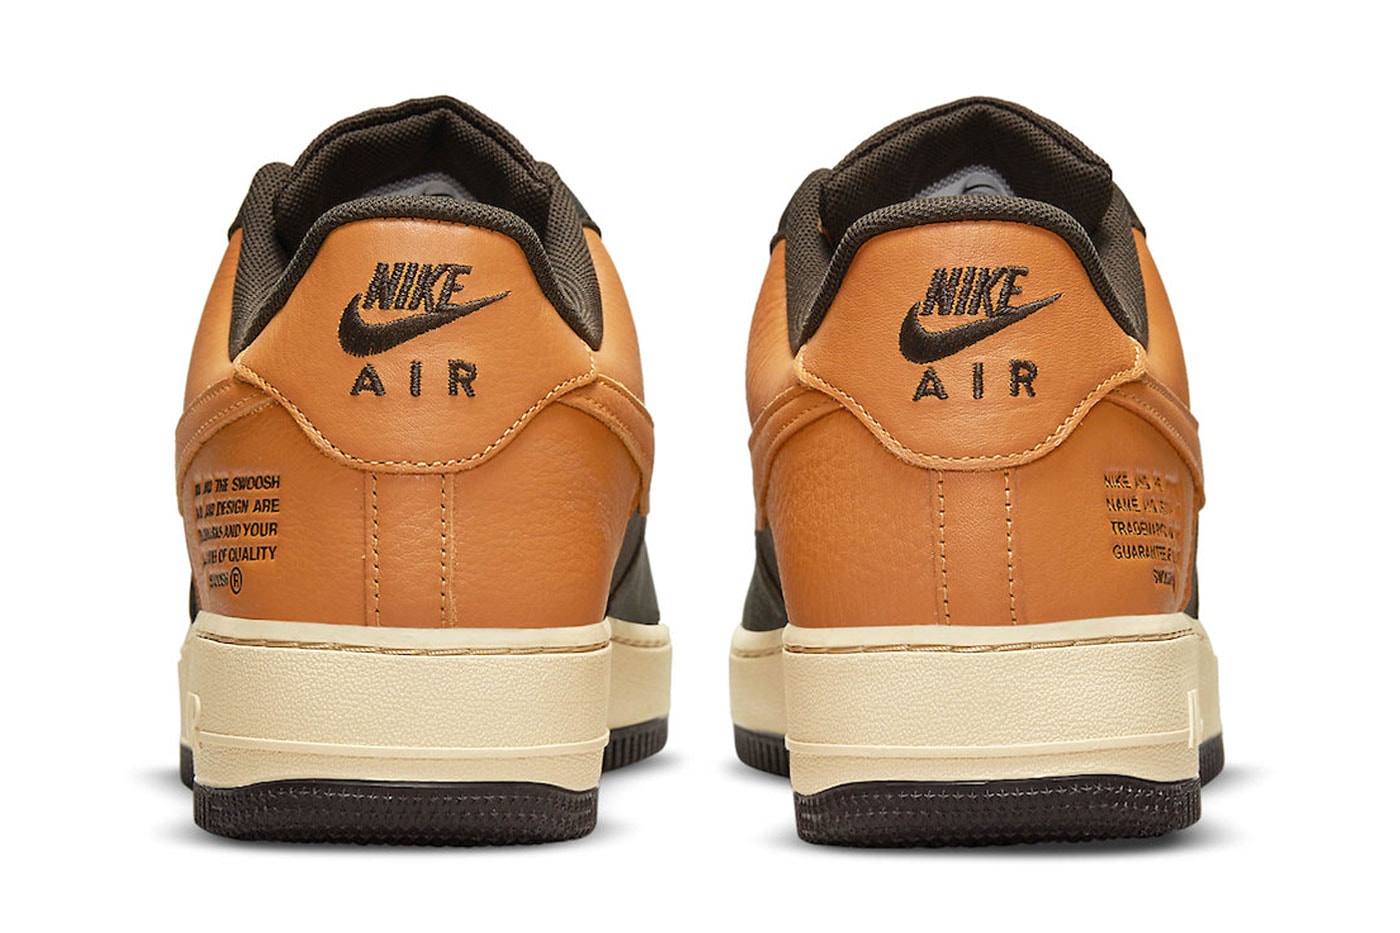 Nike Air Force 1 GORE-TEX Arrives in Olive and Shattered Backboard Colorways black orange brown sail yellowed midsole olive light grey do2760 220 do2760 206 release info